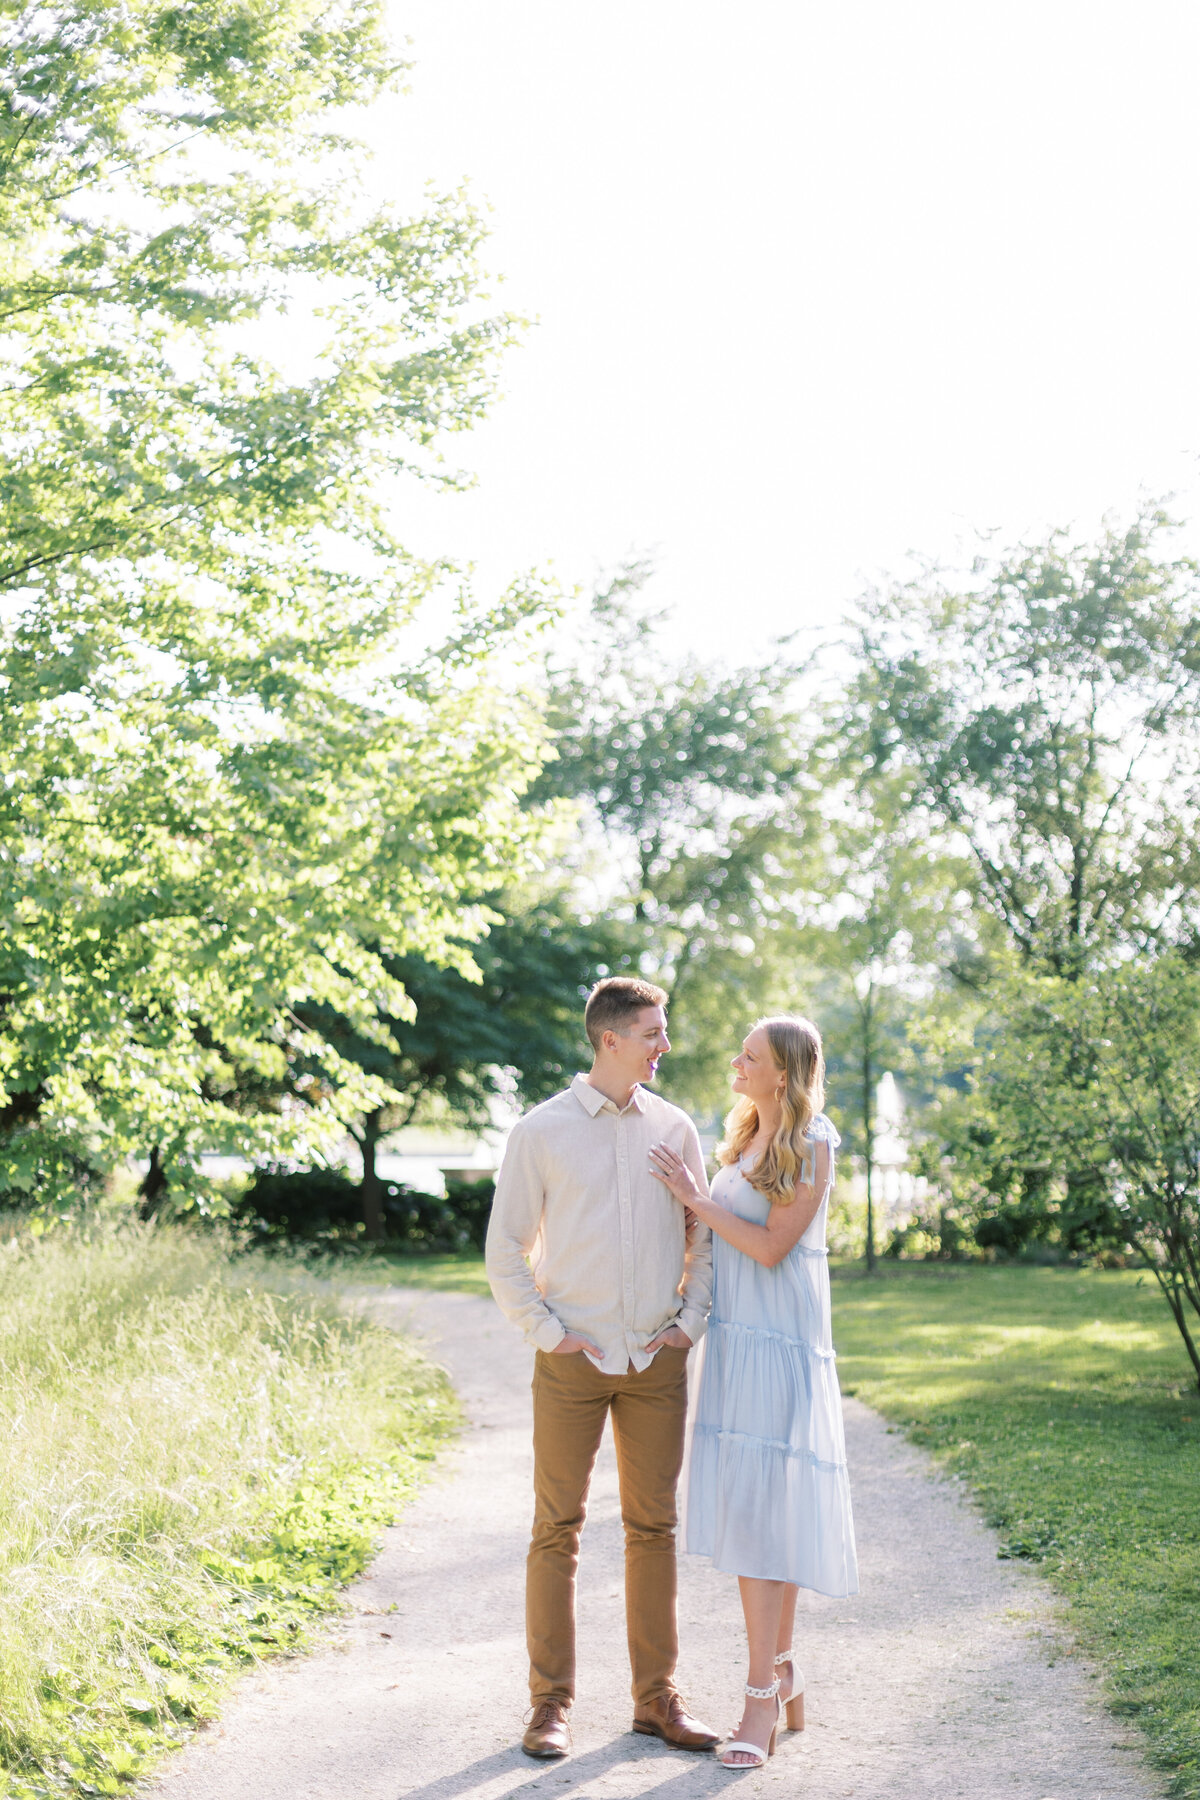 amber-rhea-photography-midwest-wedding-photographer-stl-engagement210A4733